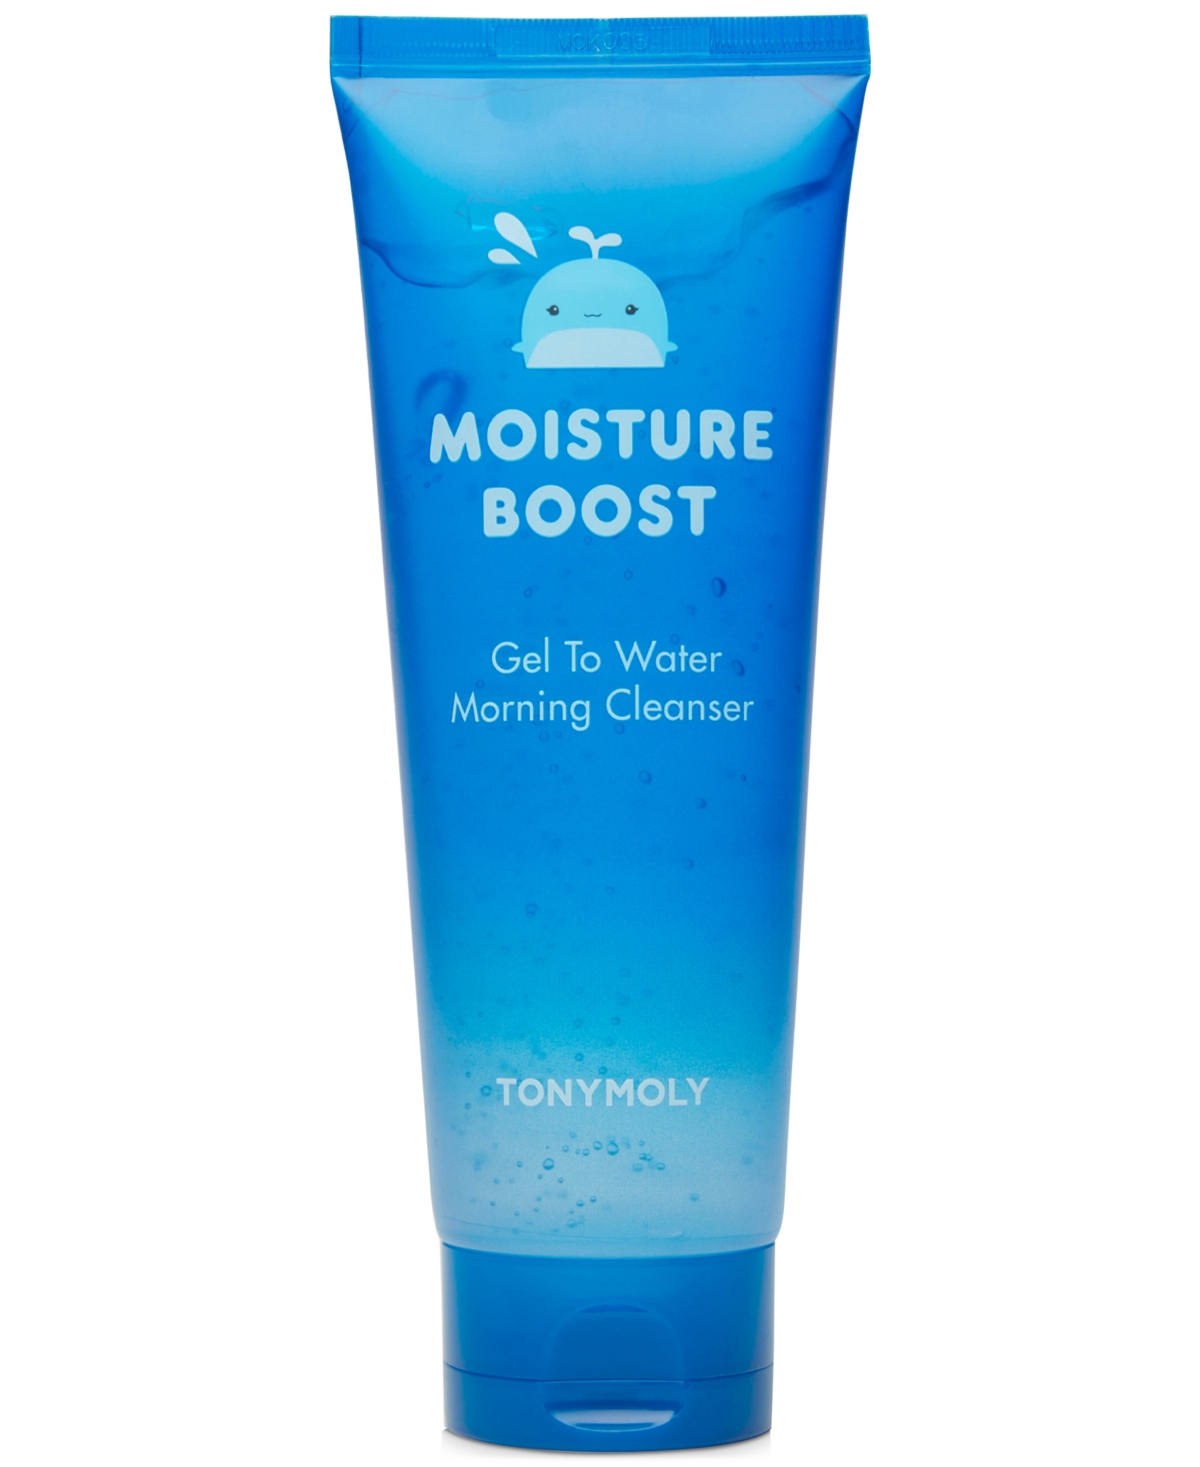 Moisture Boost Gel To Water Morning Cleanser